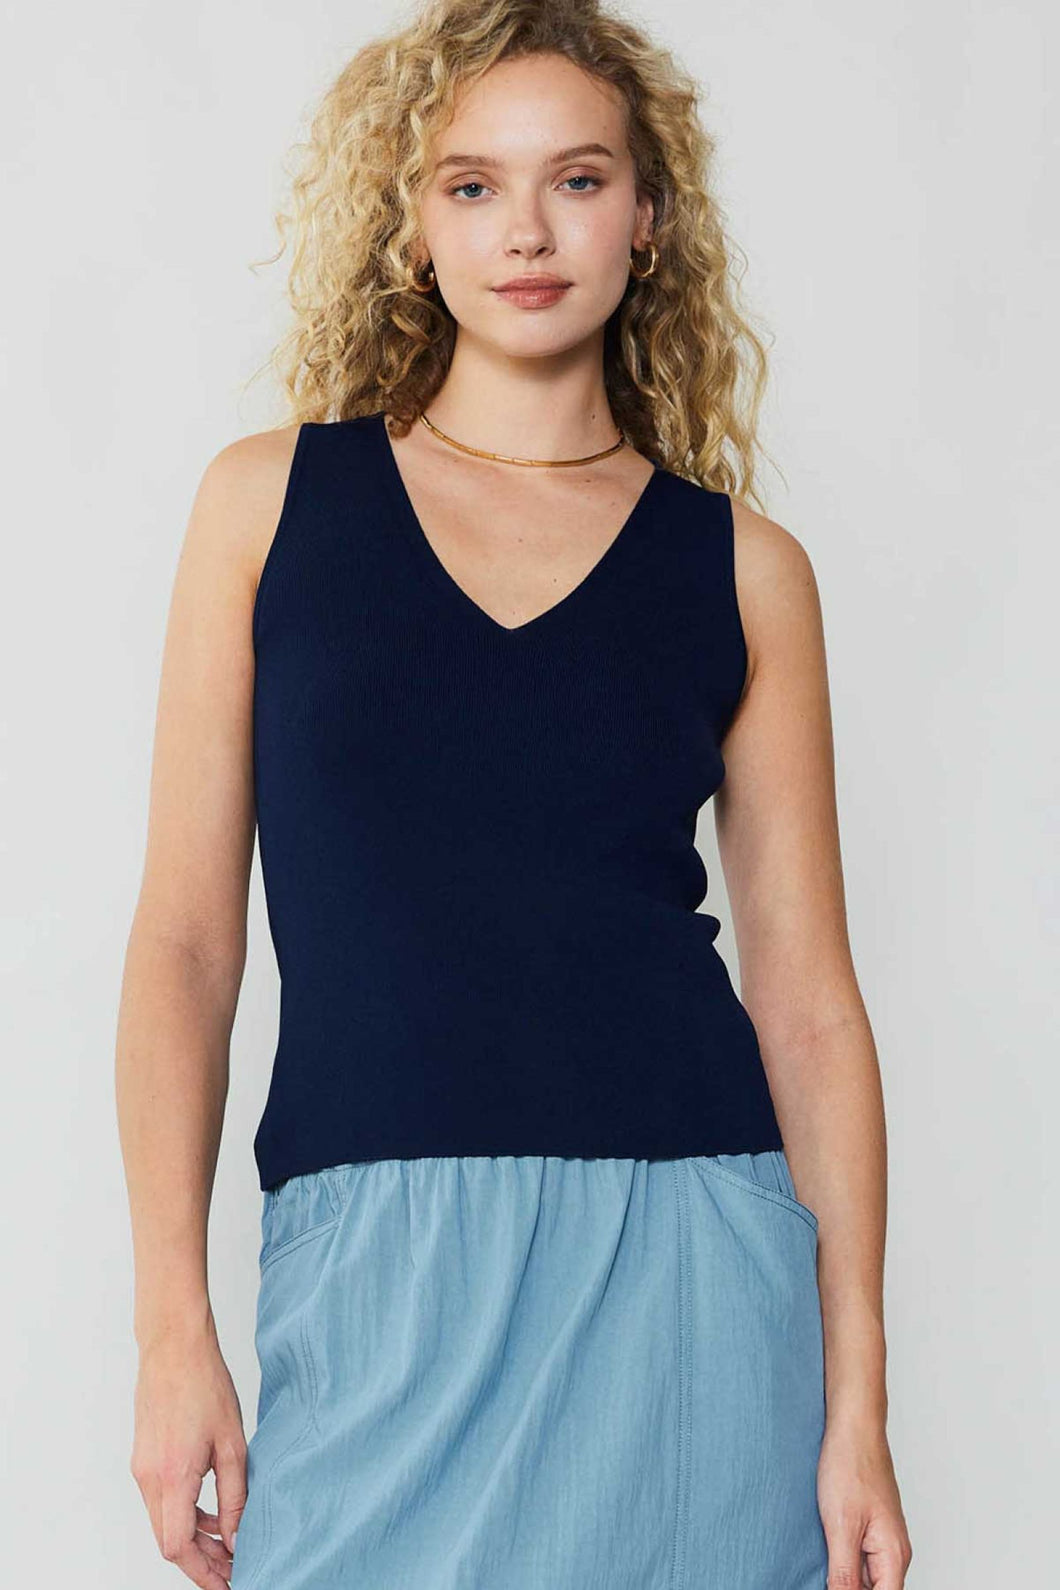 The model showcases sophistication in a navy blue skirt and a v-neck top, elevating any outfit with elegance